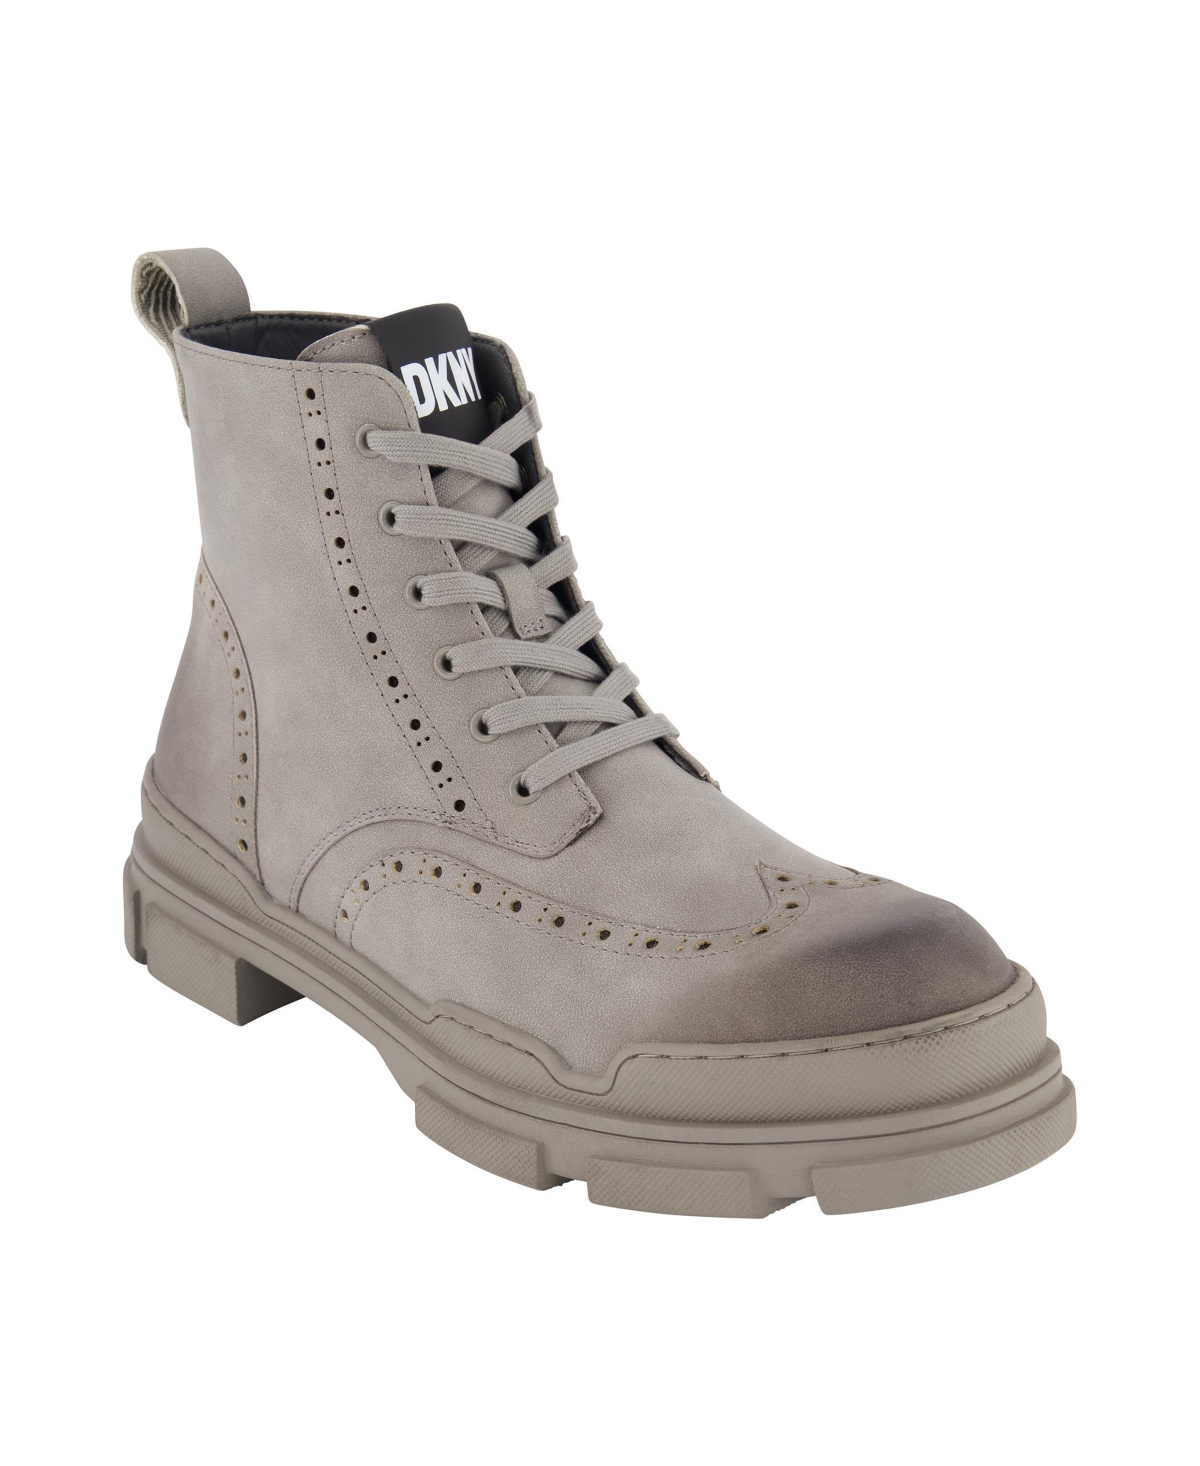 DKNY MEN'S PERFORATED RUBBER LUG SOLE WINGTIP BOOTS